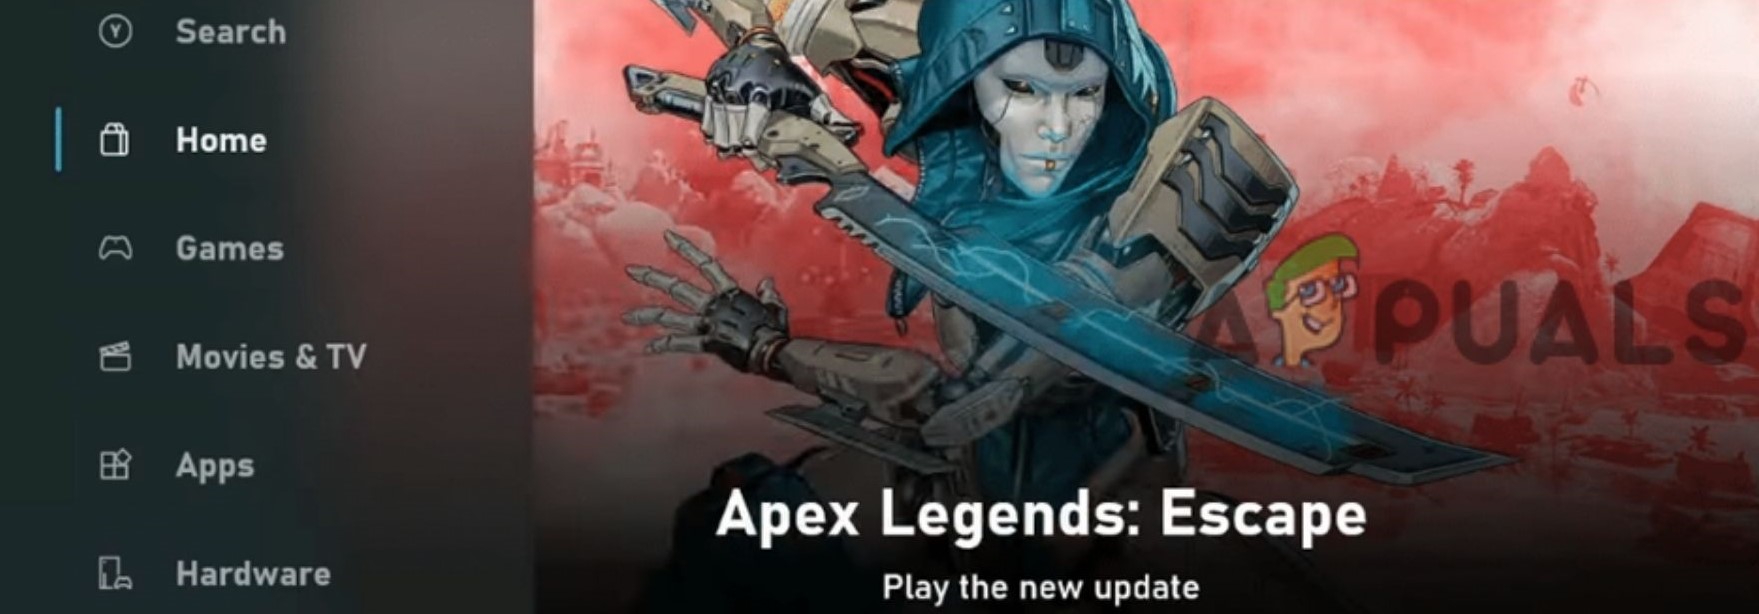 Fix Apex Legends Crashing In Ranked Mode on Xbox